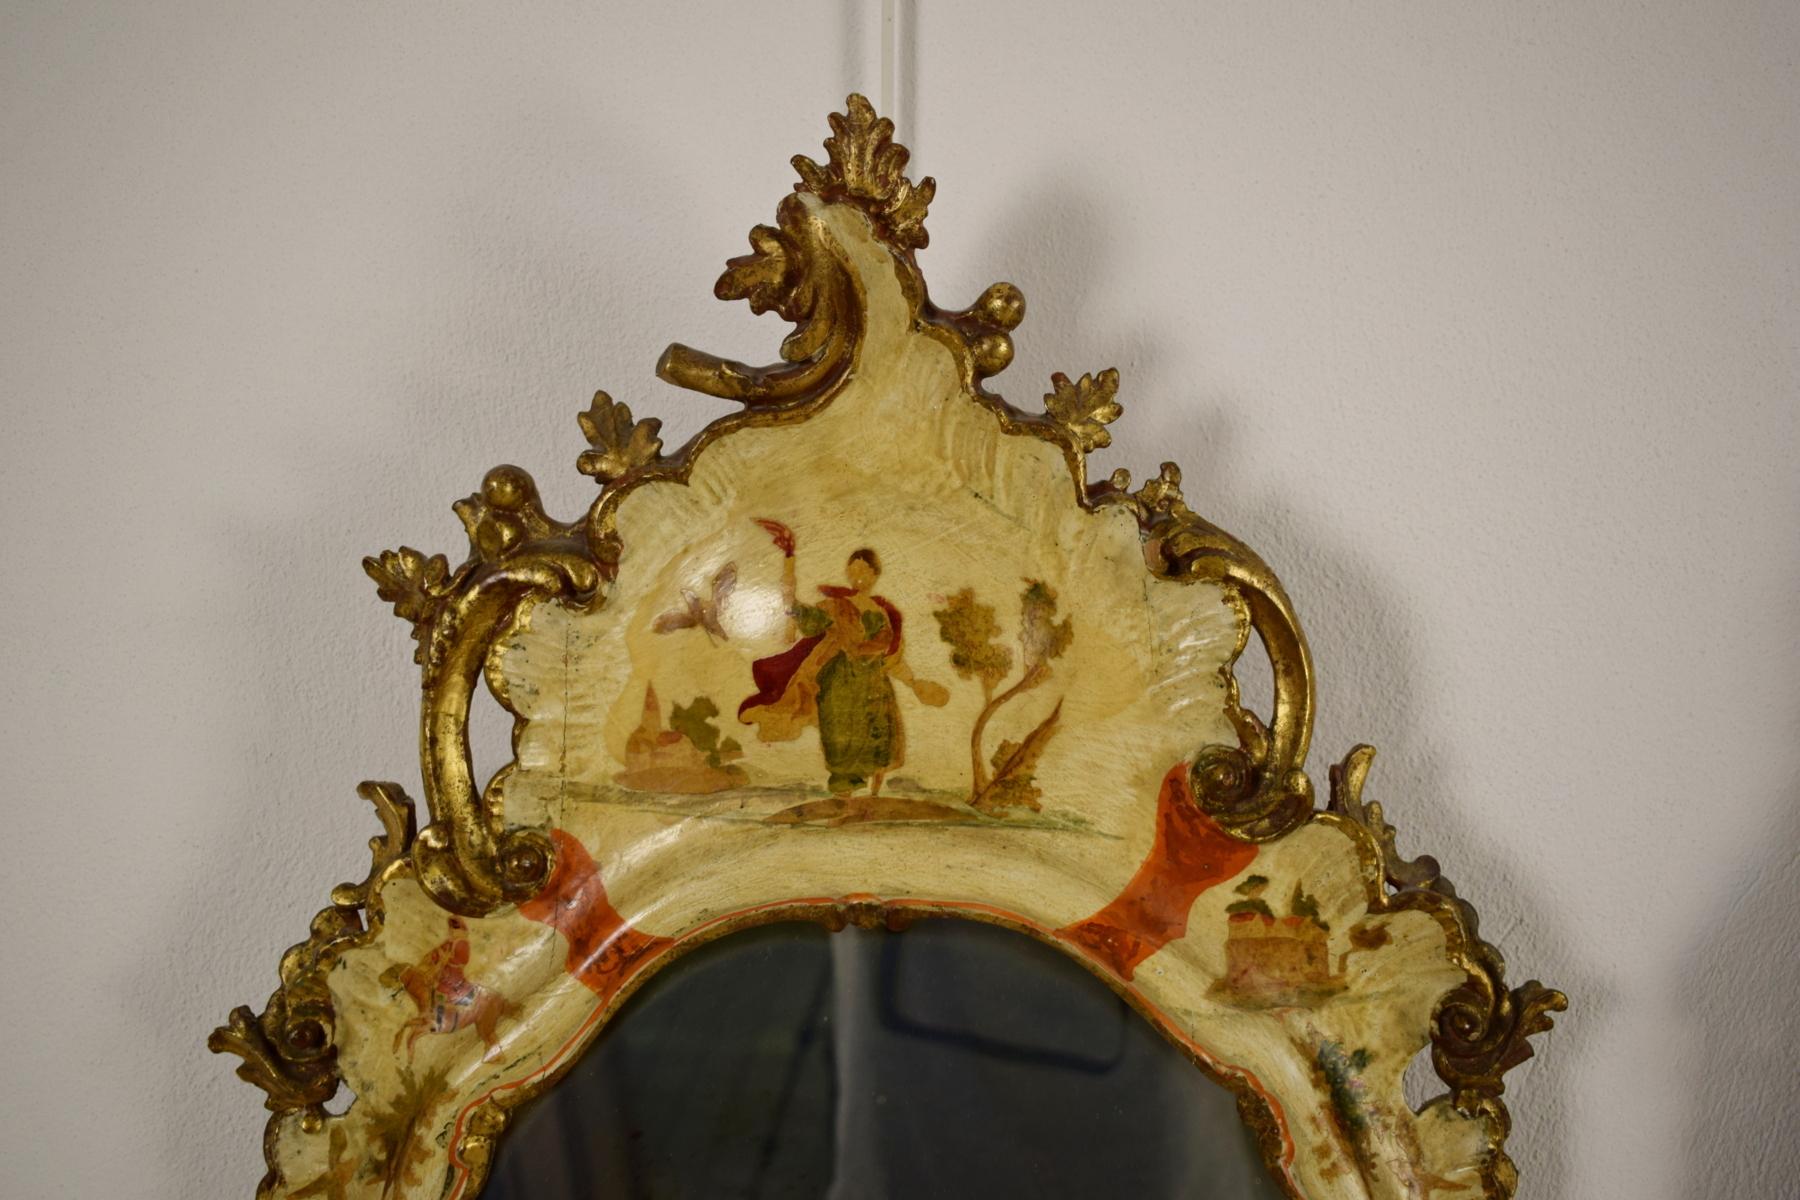 20th Century, Venice Arte Povera Lacquered Wood, Pair of Wall Mirrors  2